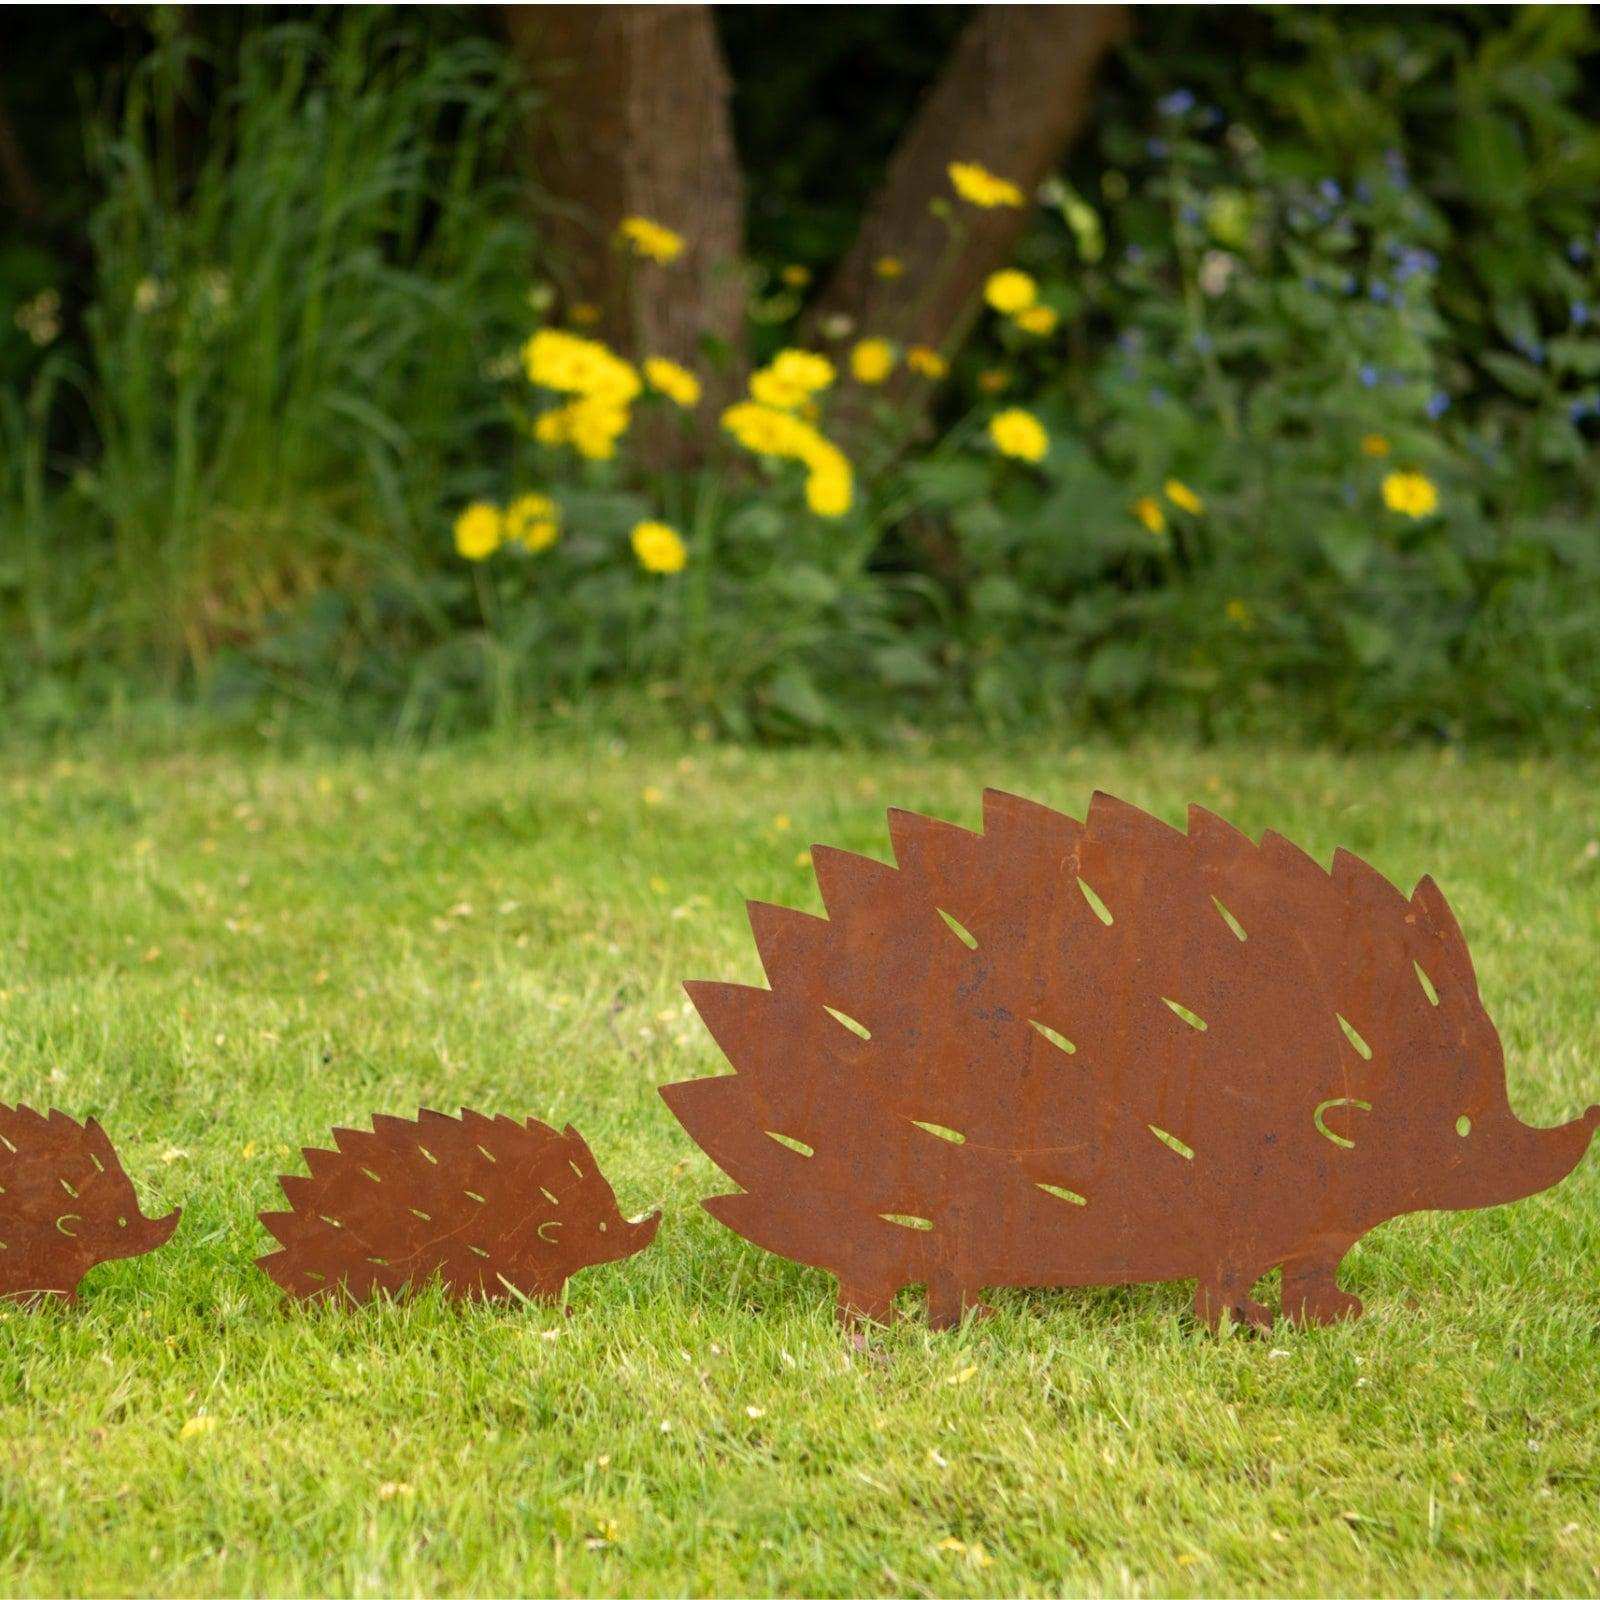 Hedgehog Family Garden Silhouettes - The Farthing